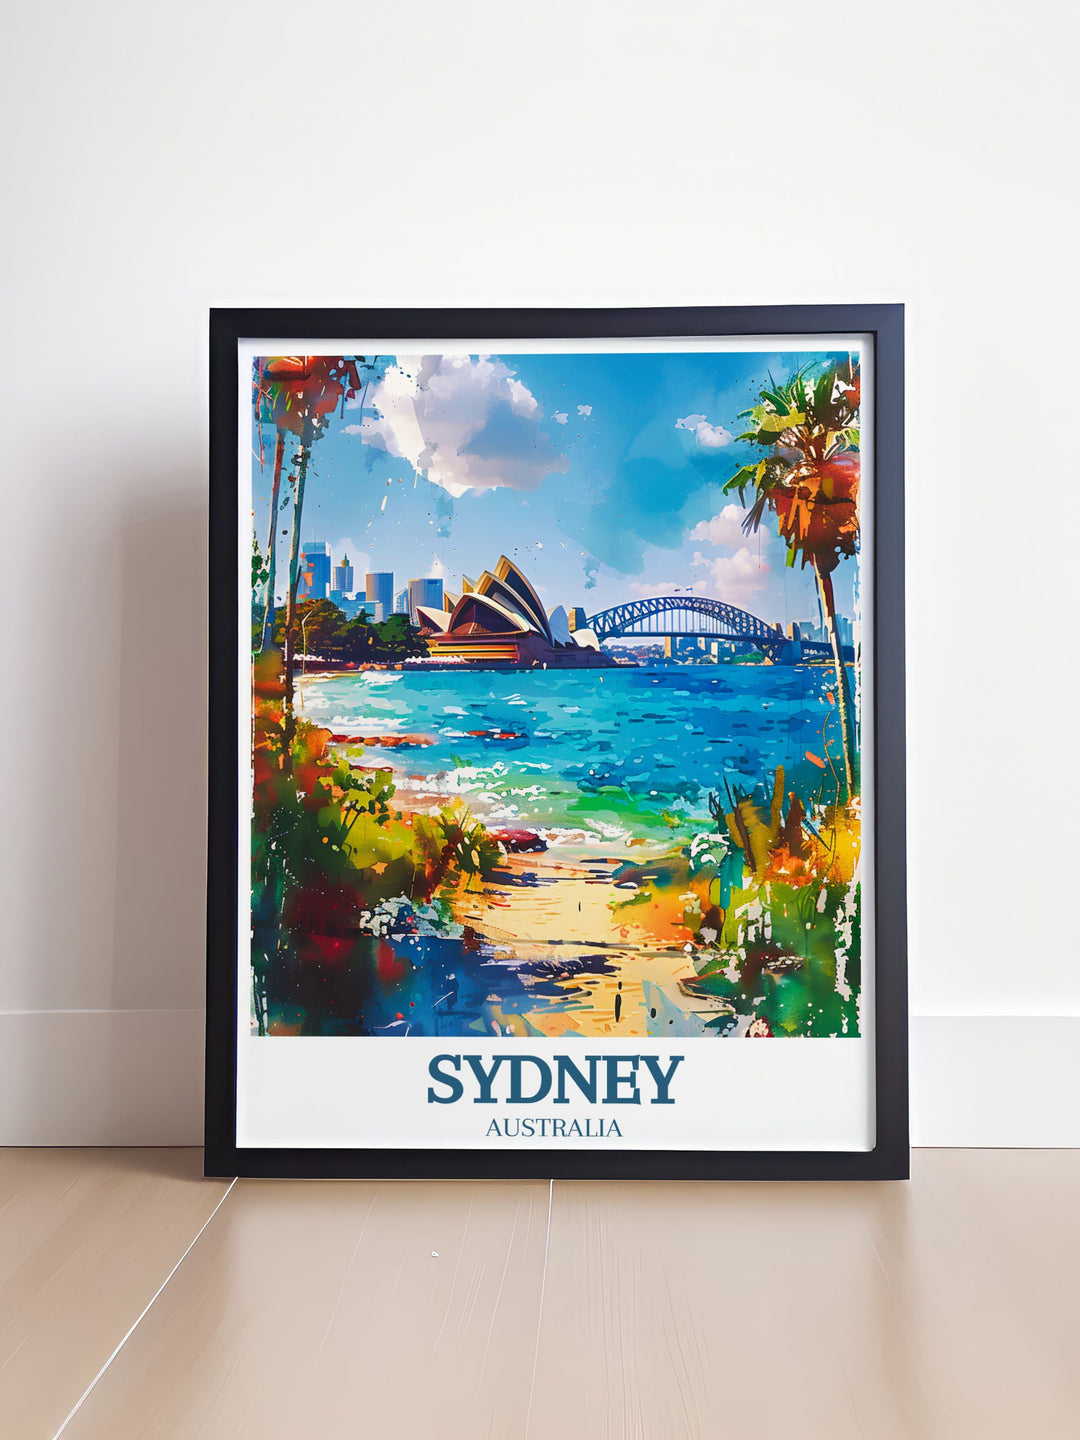 Elegant Sydney illustration featuring the Sydney Opera House and Sydney Harbour Bridge detailed artwork that serves as a focal point in any room bringing the charm and adventure of Australias vibrant city into your home